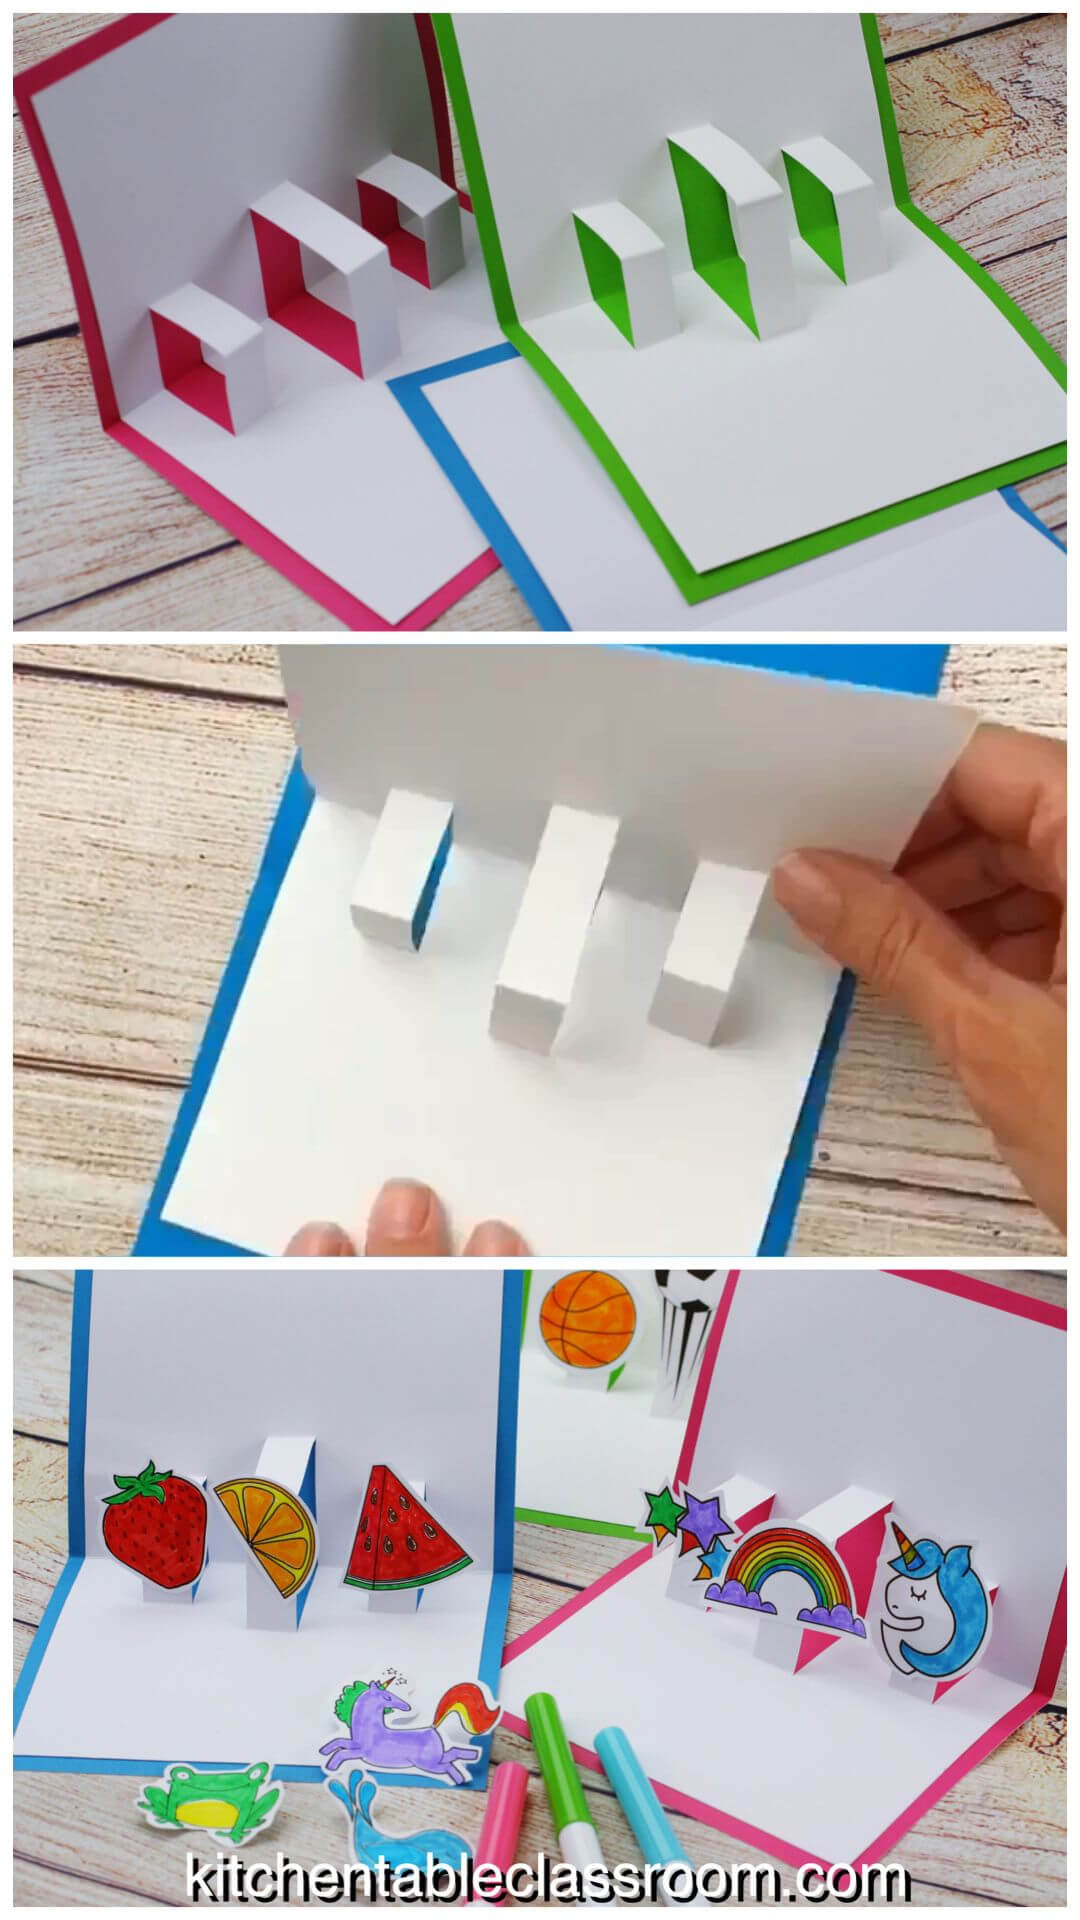 Build Your Own 3D Card With Free Pop Up Card Templates | Pop Intended For Diy Pop Up Cards Templates